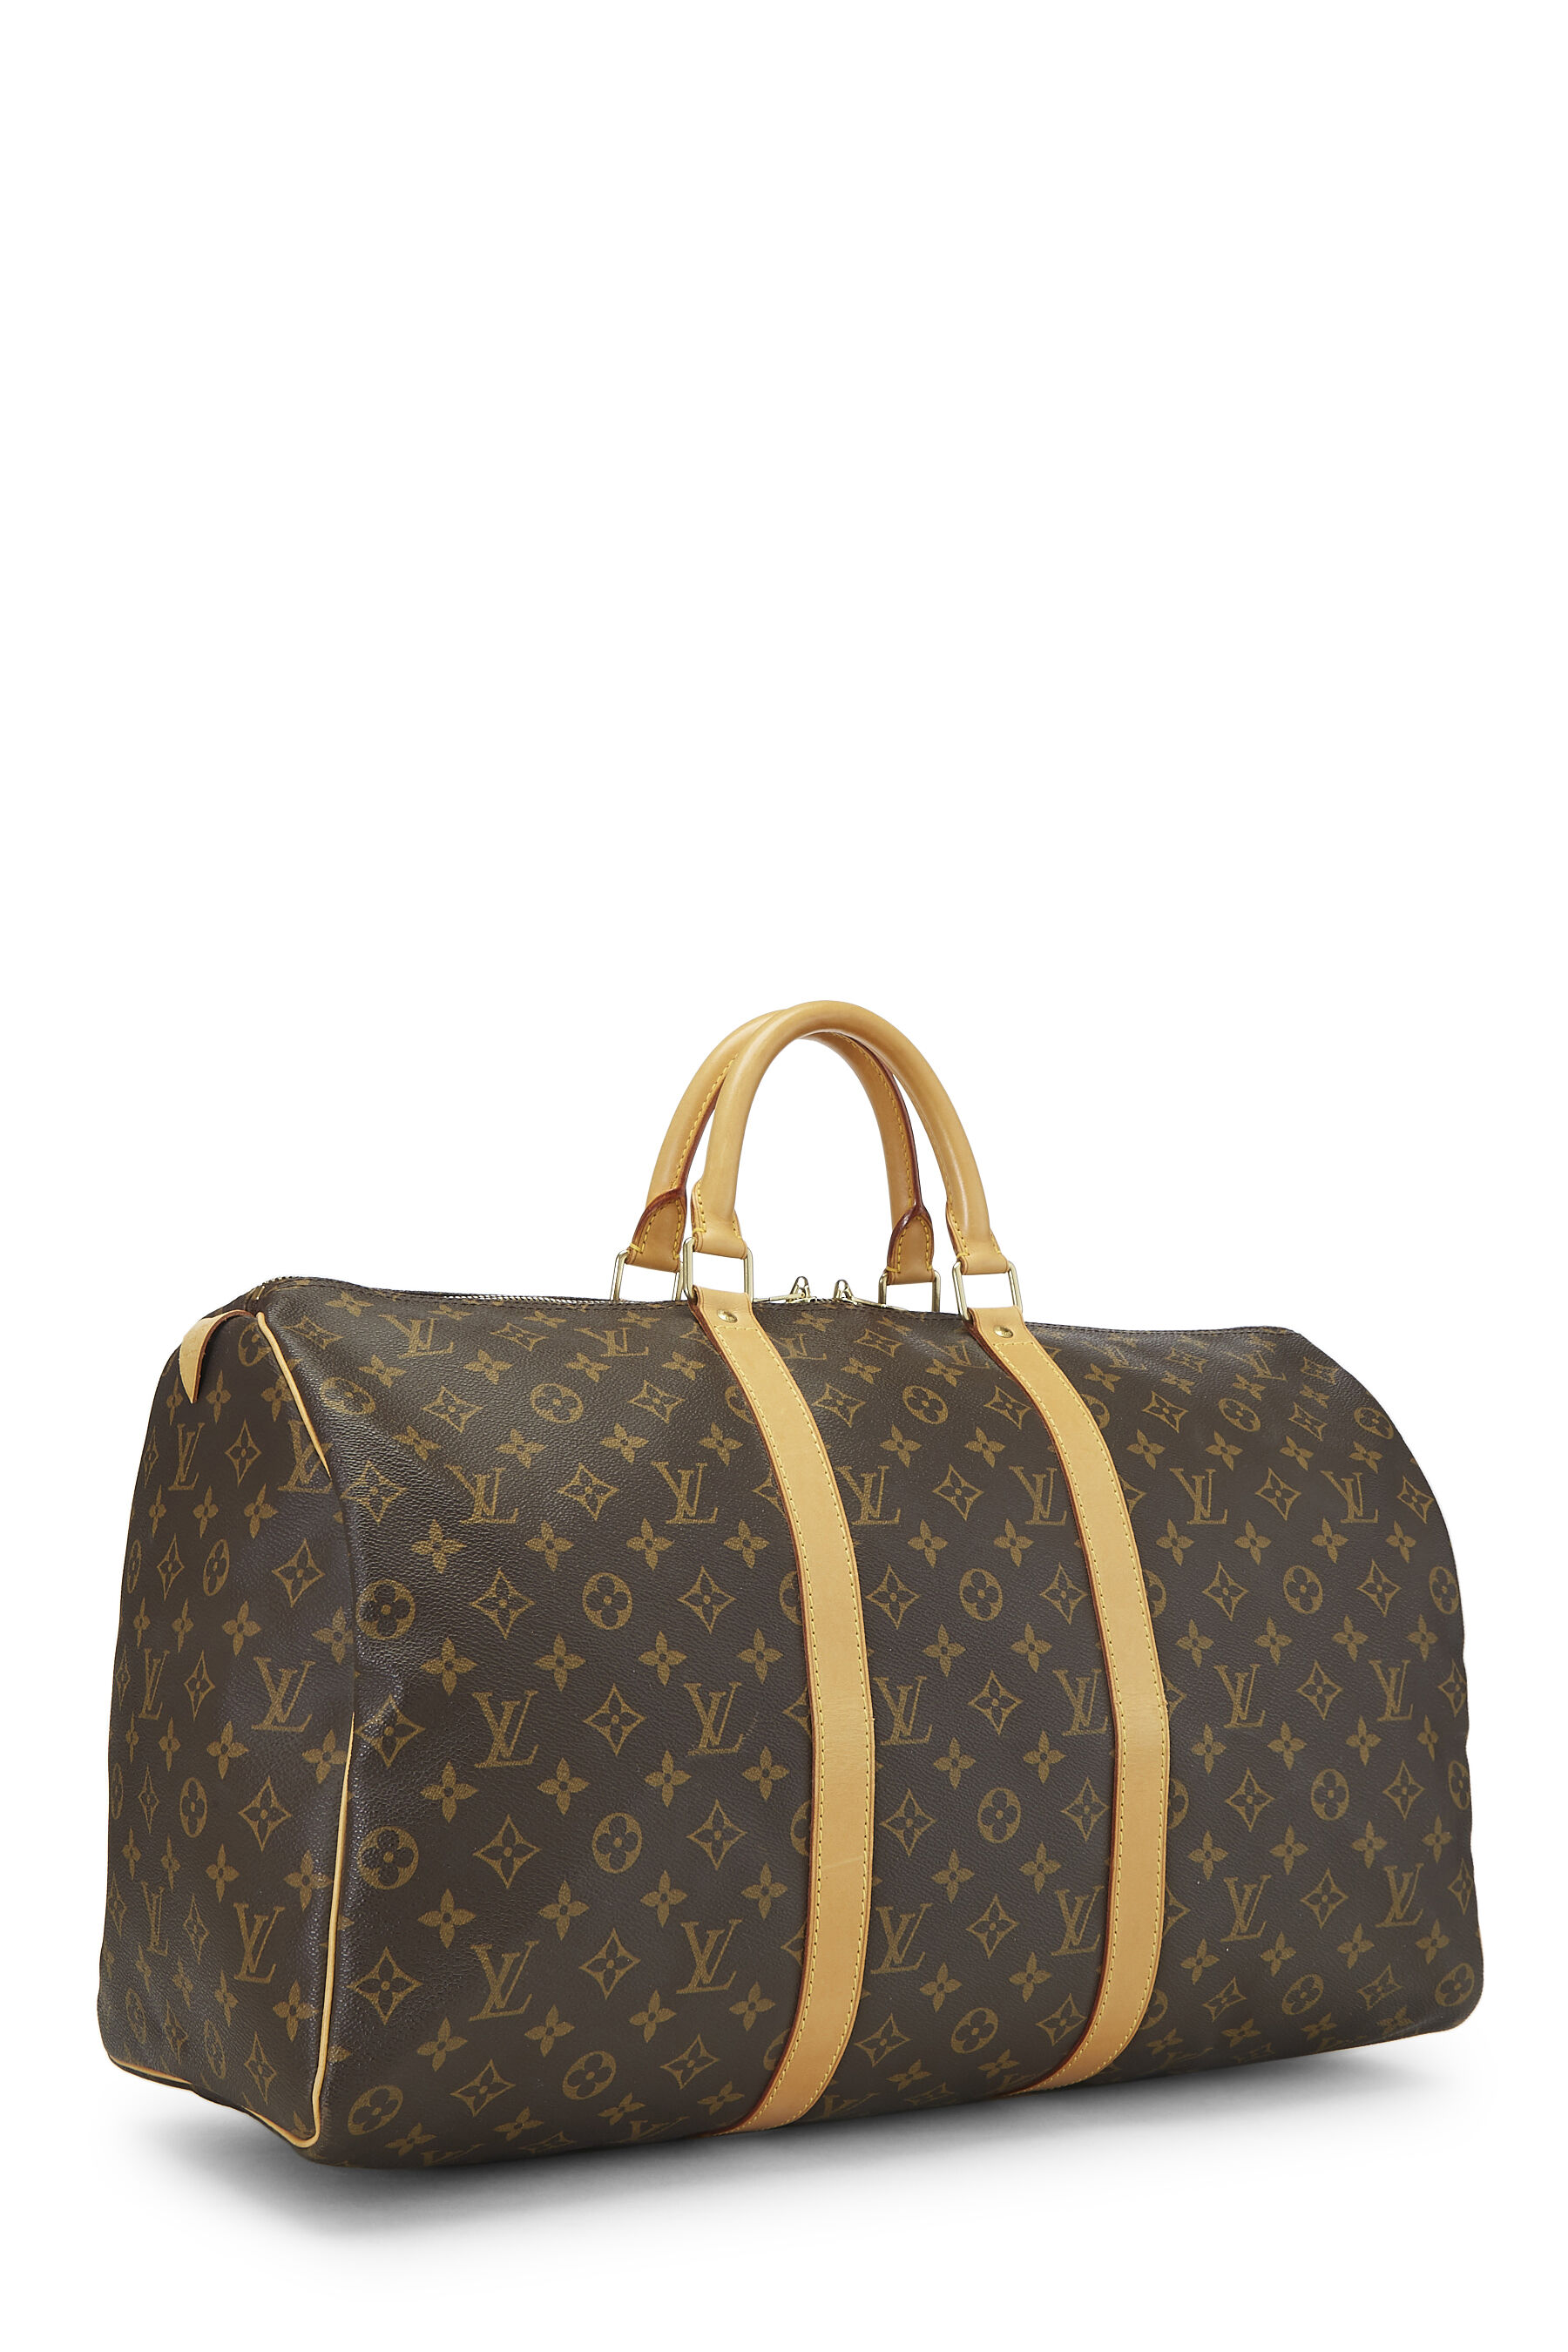 Fantastic Genuine LOUIS VUITTON Keepall / Duffle Bag - THIS IS HOW EVERYONE  WANTS THEM Great Wear / Patina #1590509